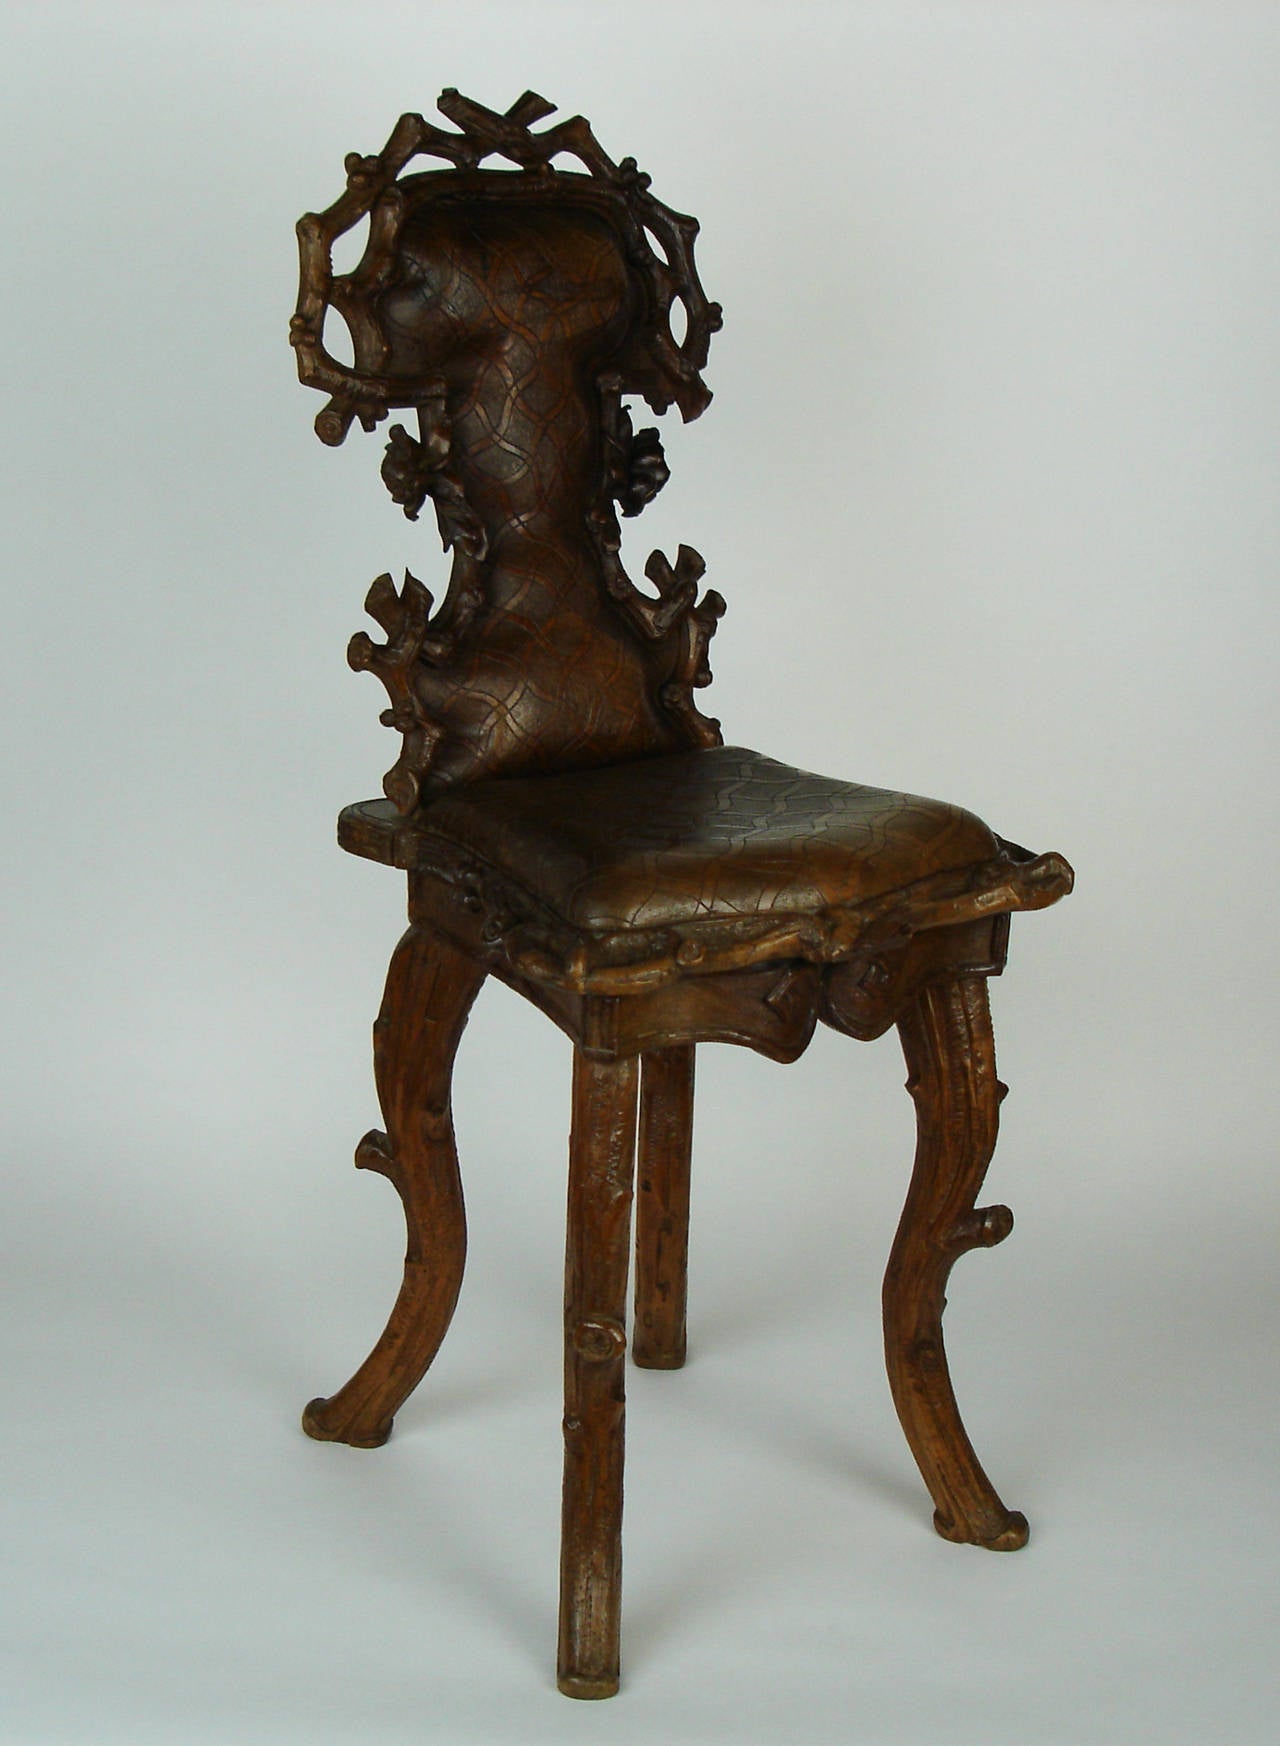 A Black Forest chair in carved lime; branches and roses sculpted on the back, a trompe l'oeil checked cloth on the seat and the back. The seat open on a box (formerly, a musical box).Produced in Brienz (Switzerland).